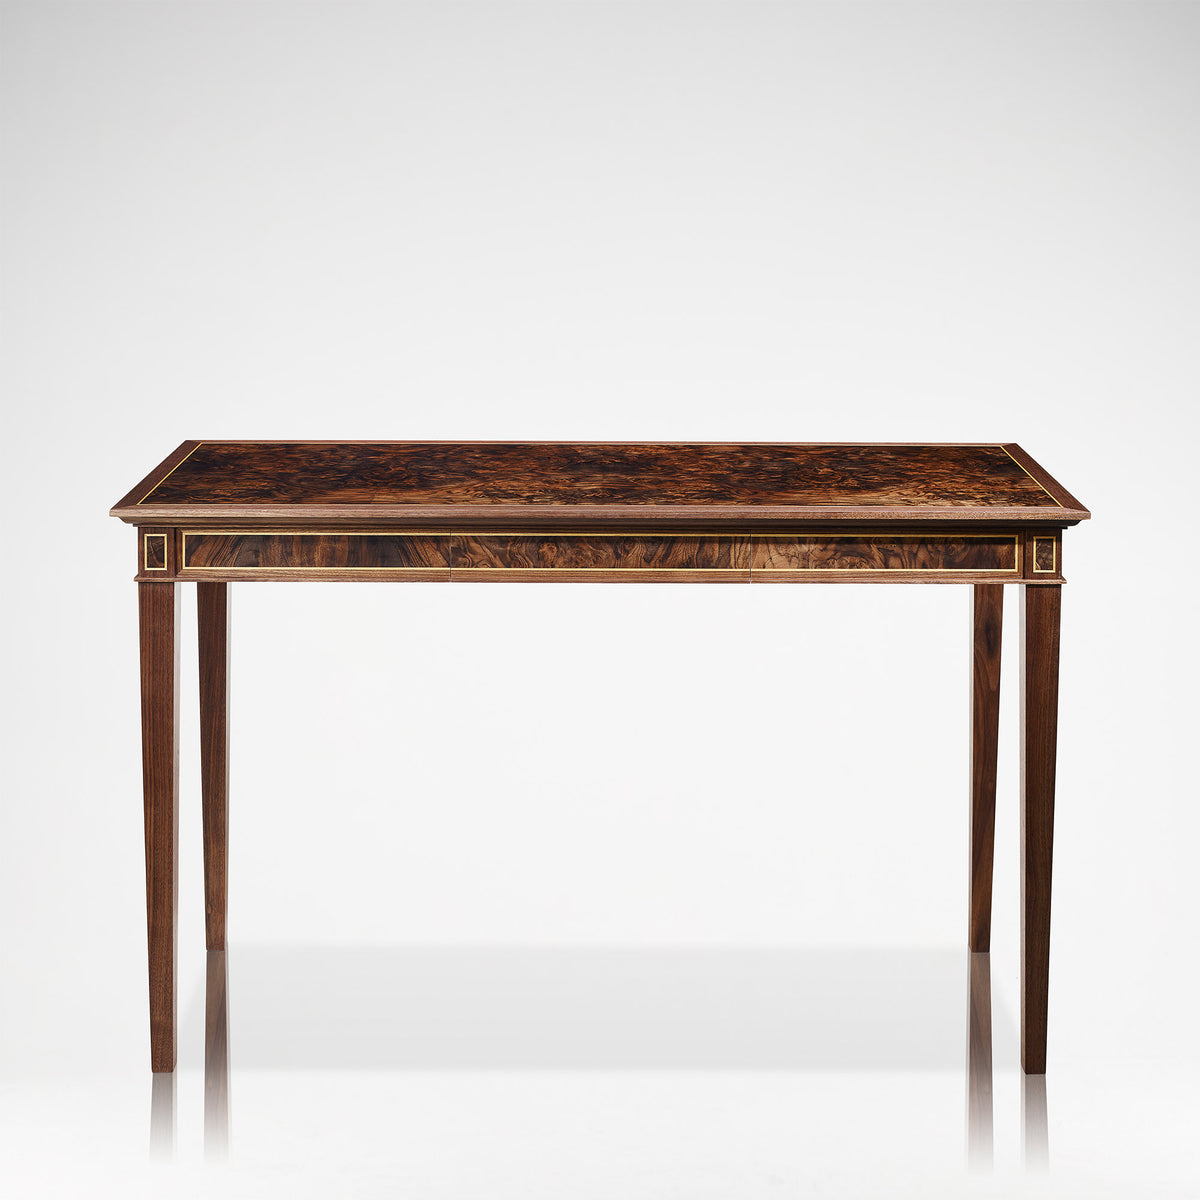 LINLEY Classic Console Table | Bespoke Design & Luxury Furniture | LINLEY